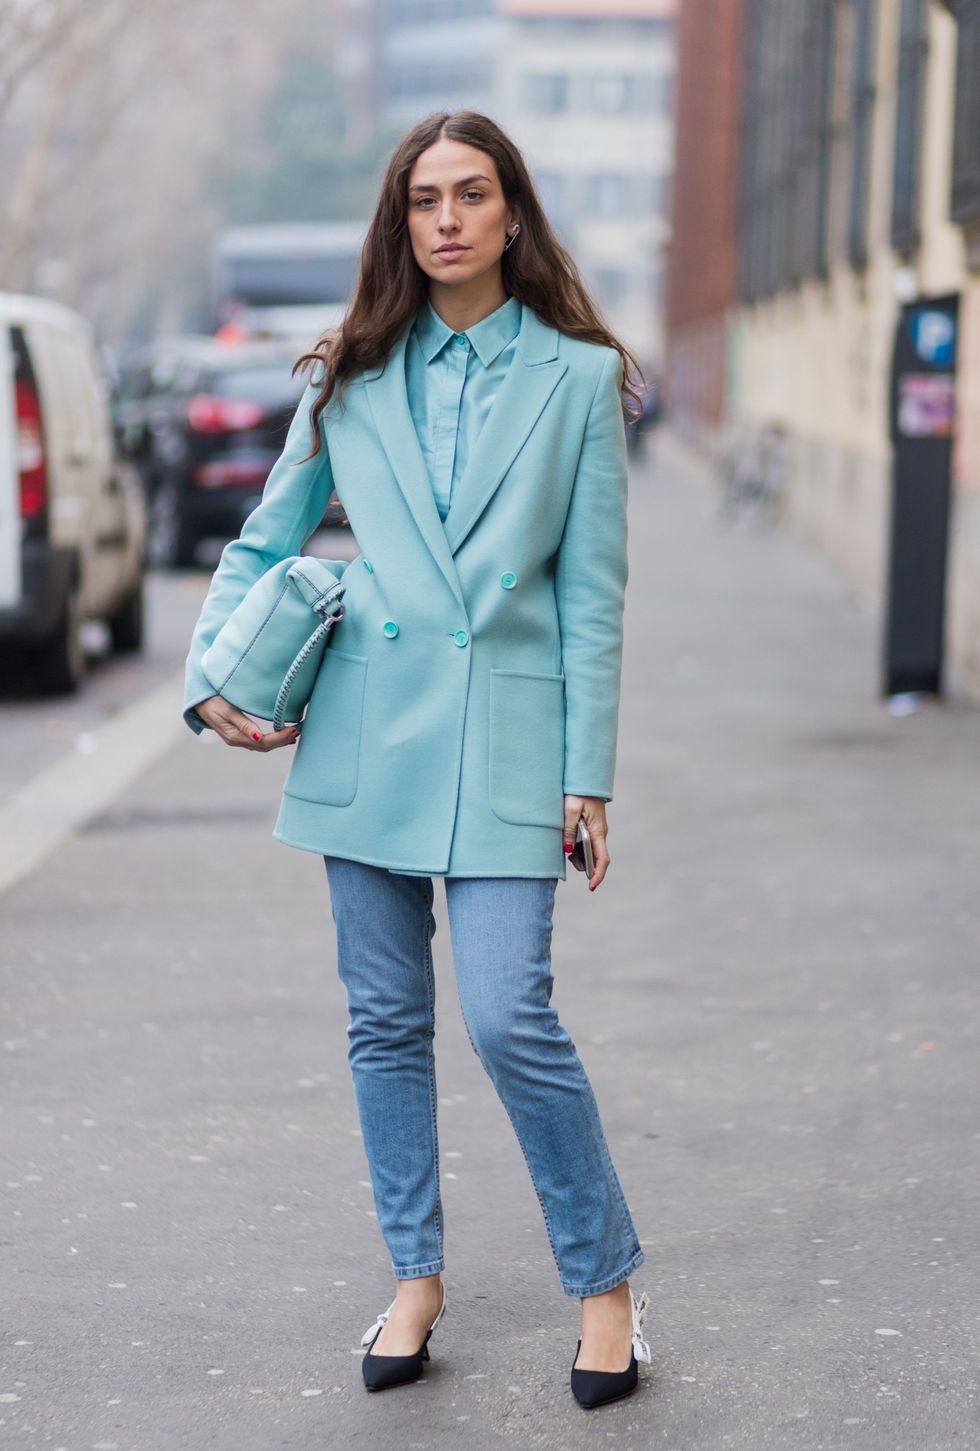 Clothing, Street fashion, Coat, Blue, Fashion, Turquoise, Overcoat, Jeans, Outerwear, Trench coat, 